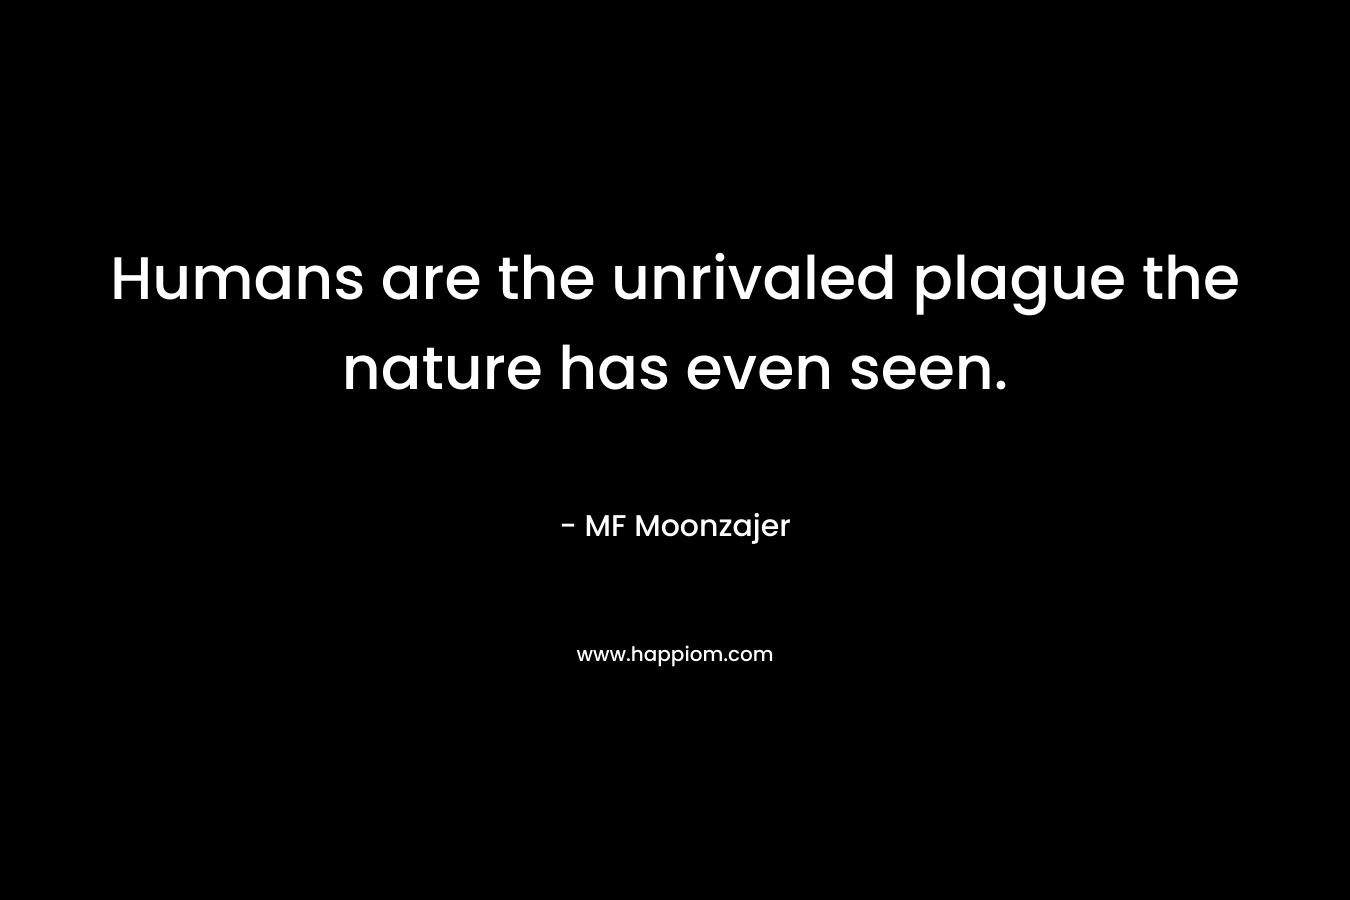 Humans are the unrivaled plague the nature has even seen. – MF Moonzajer